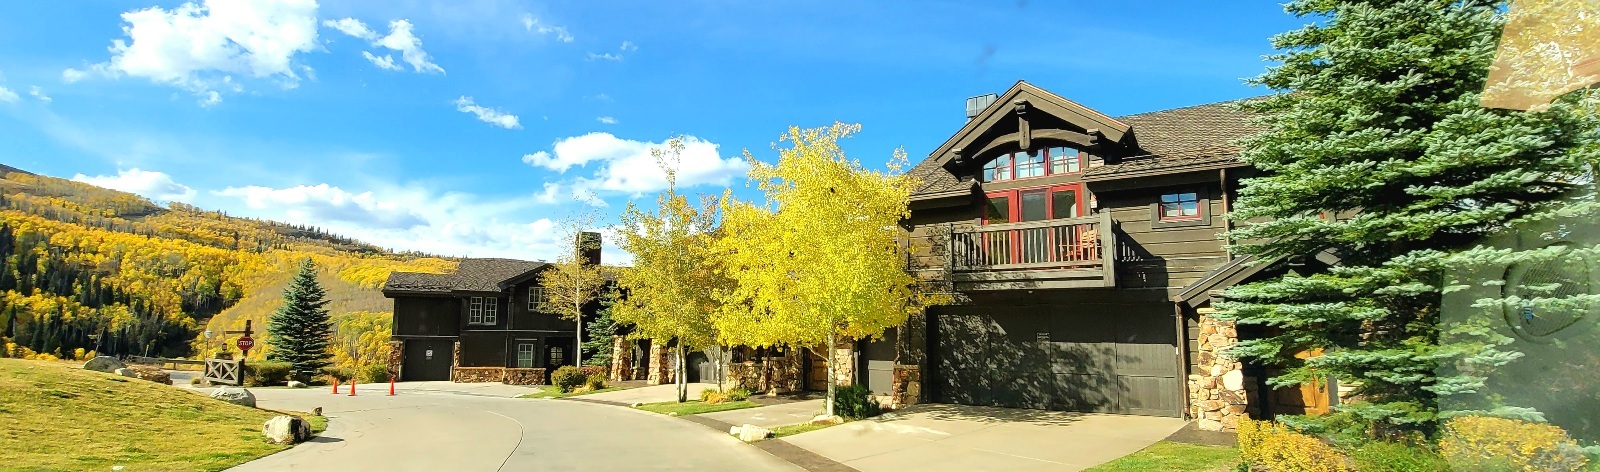 Ironwood condos for sale in the Empire Pass area of Deer Valley